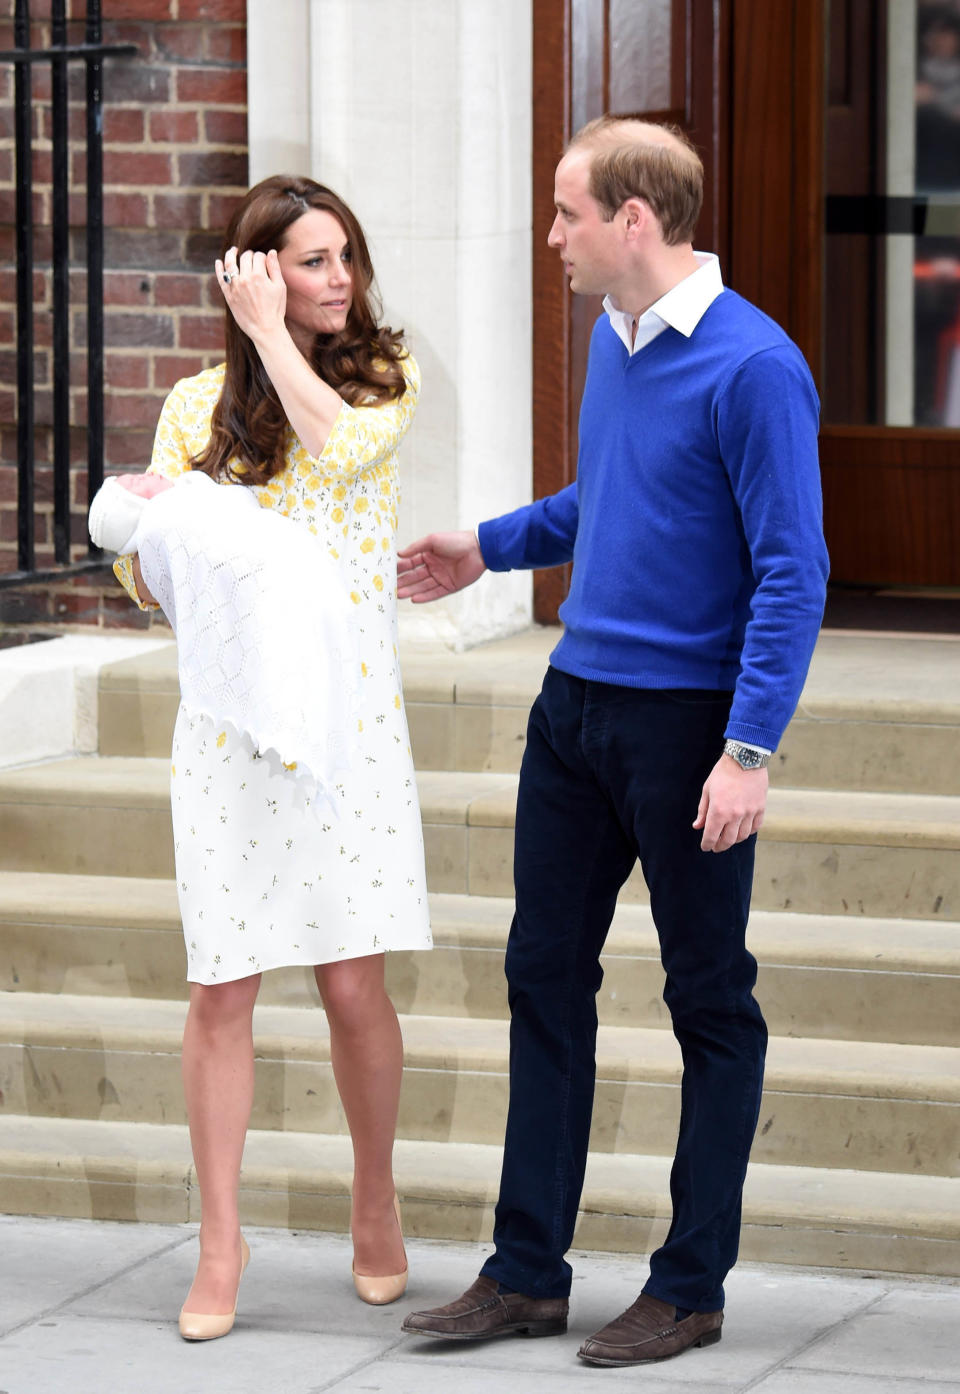 Photo by: KGC-03/STAR MAX/IPx 5/2/15 The Princess of Cambridge is seen outside the Lindo Wing of St. Mary's Hospital with her parents Prince William The Duke of Cambridge and Catherine The Duchess of Cambridge.  The Princess was born on Saturday, May 2nd, 2015 at 8:34 AM weighing 8lbs. 3oz.  (Star Max/IPX via AP Images)